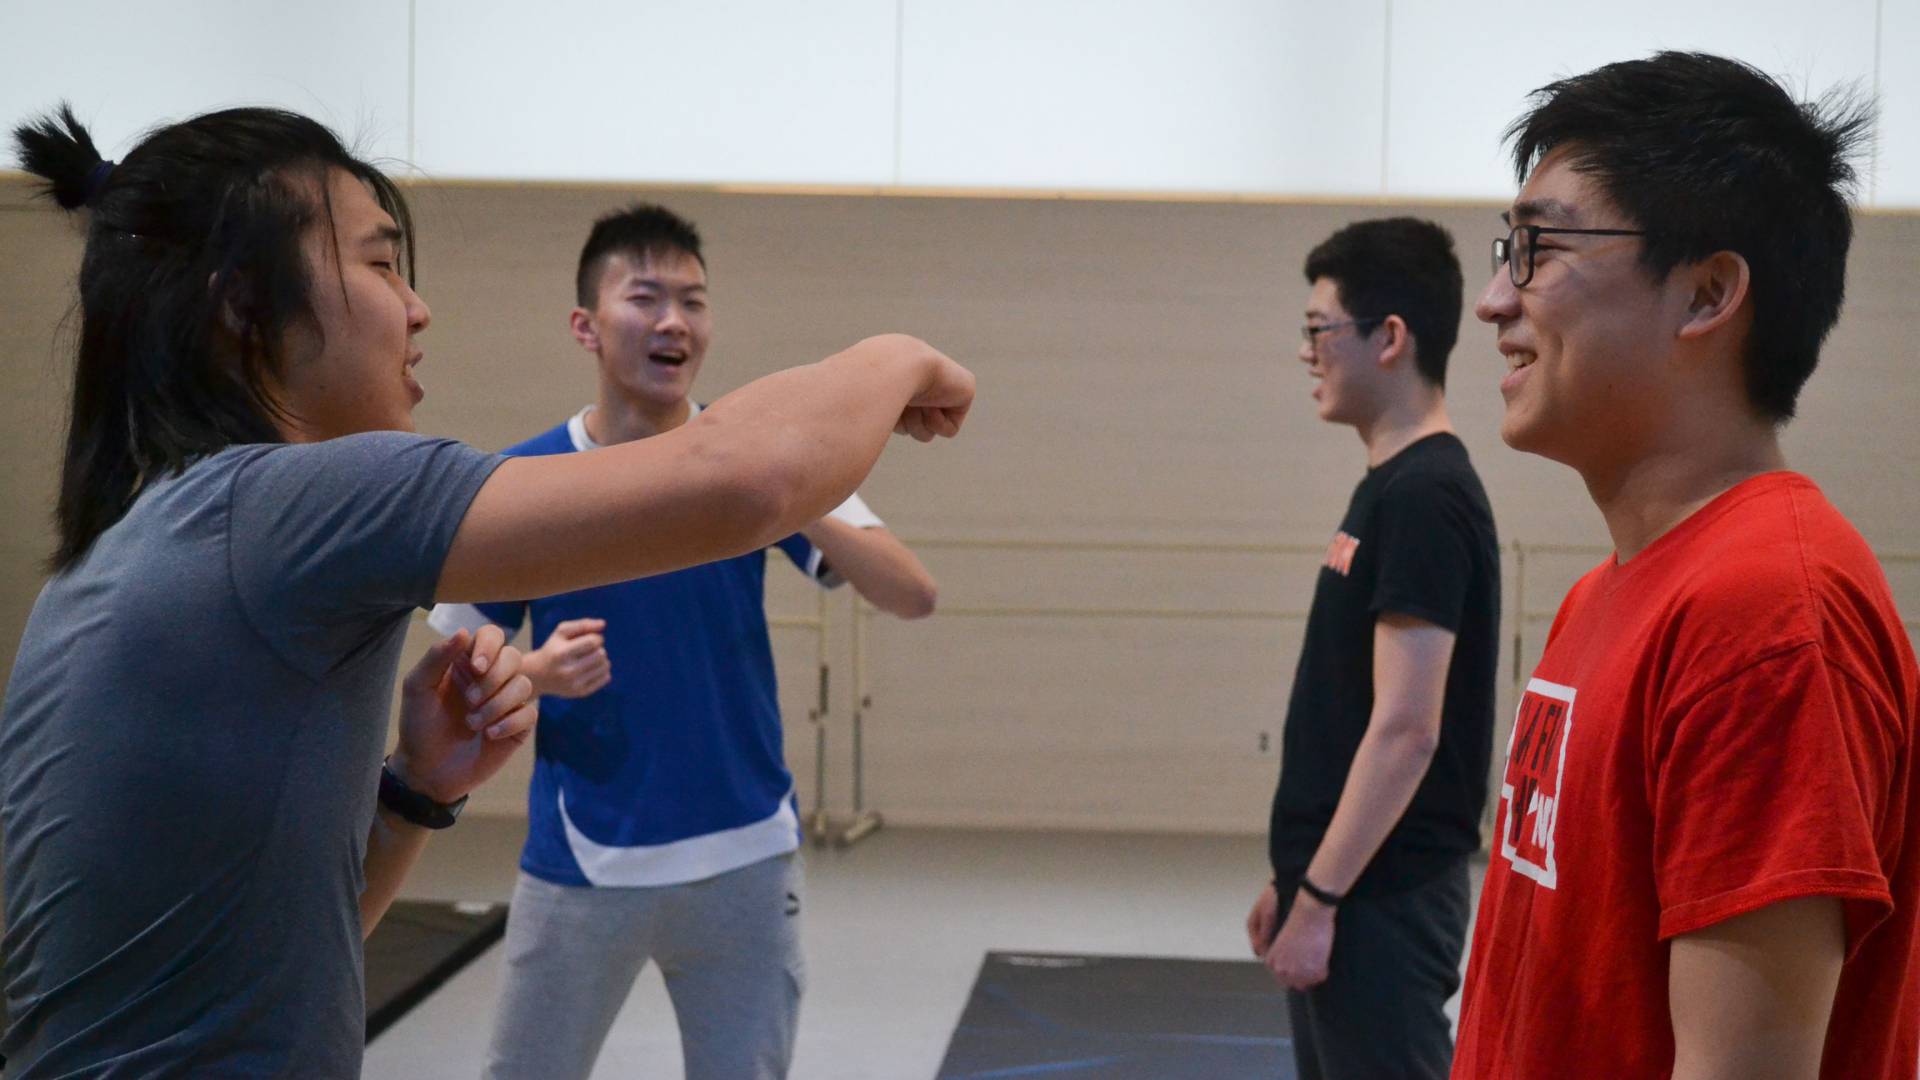 Students practicing unarmed stage combat during wintersession